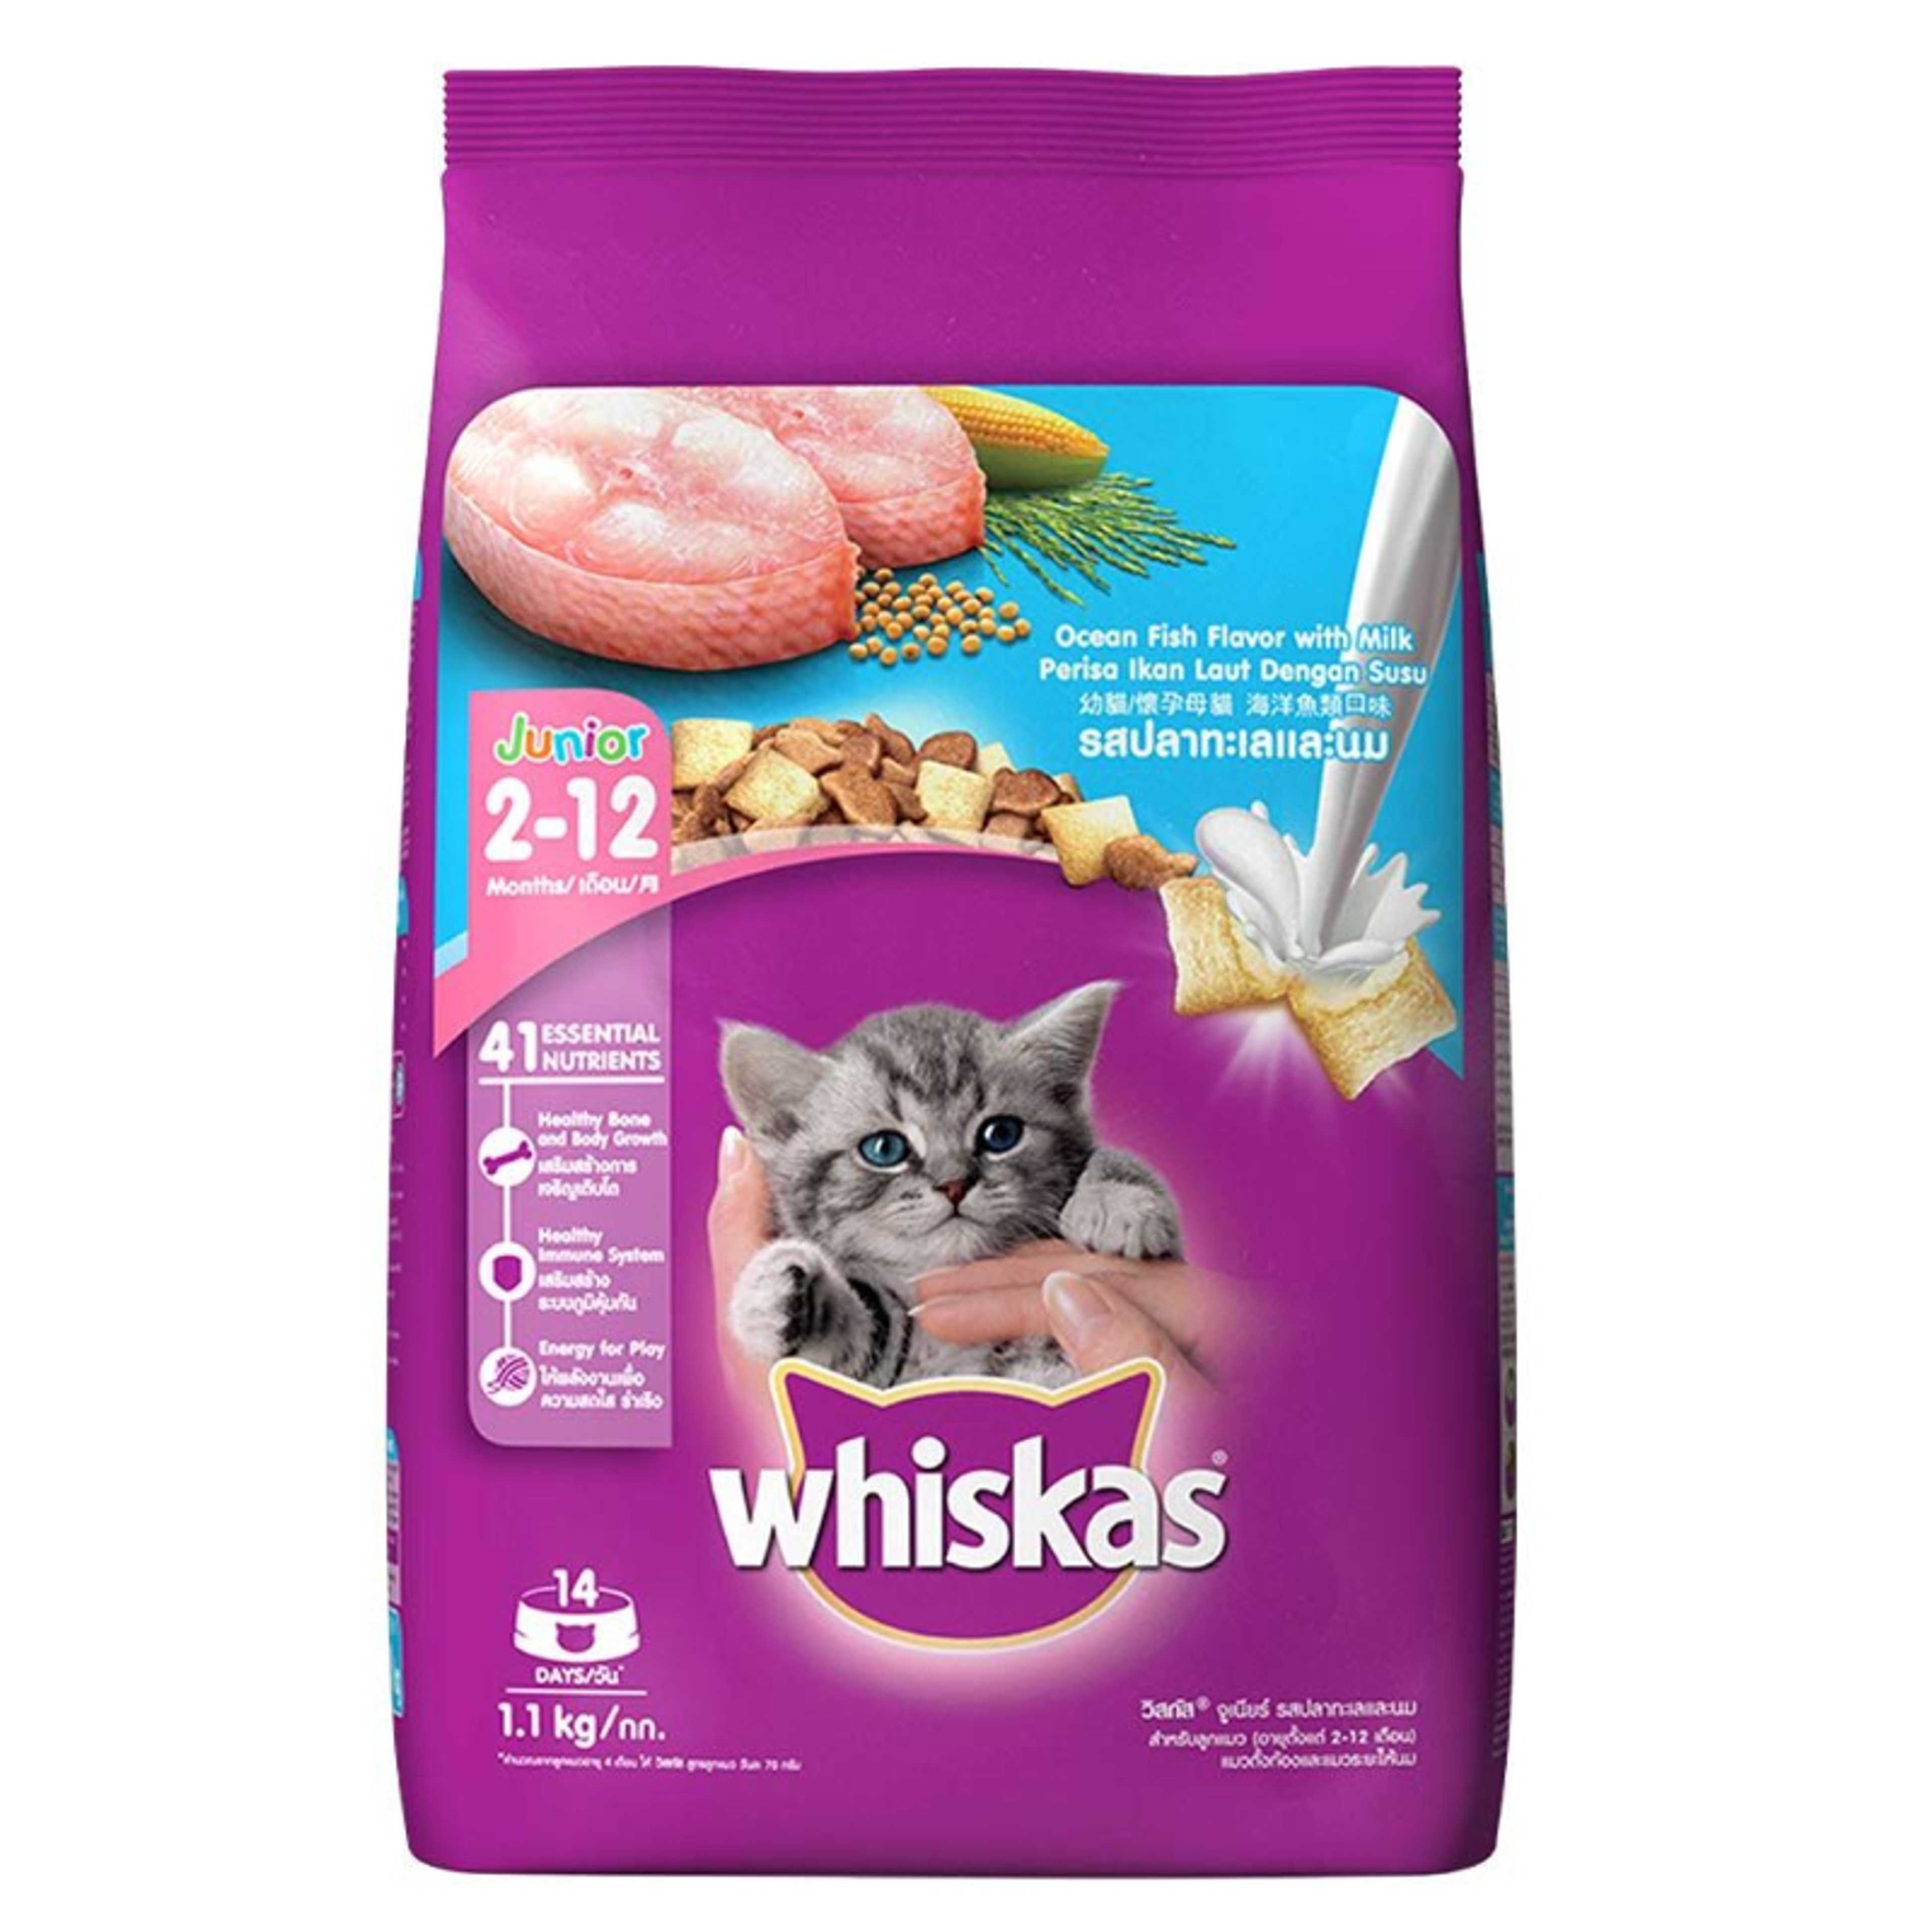 Whiskas Kittens (2-12 Months Cats) Complete Dry Cat Food Biscuits, Ocean Fish with Milk, 1.1Kg